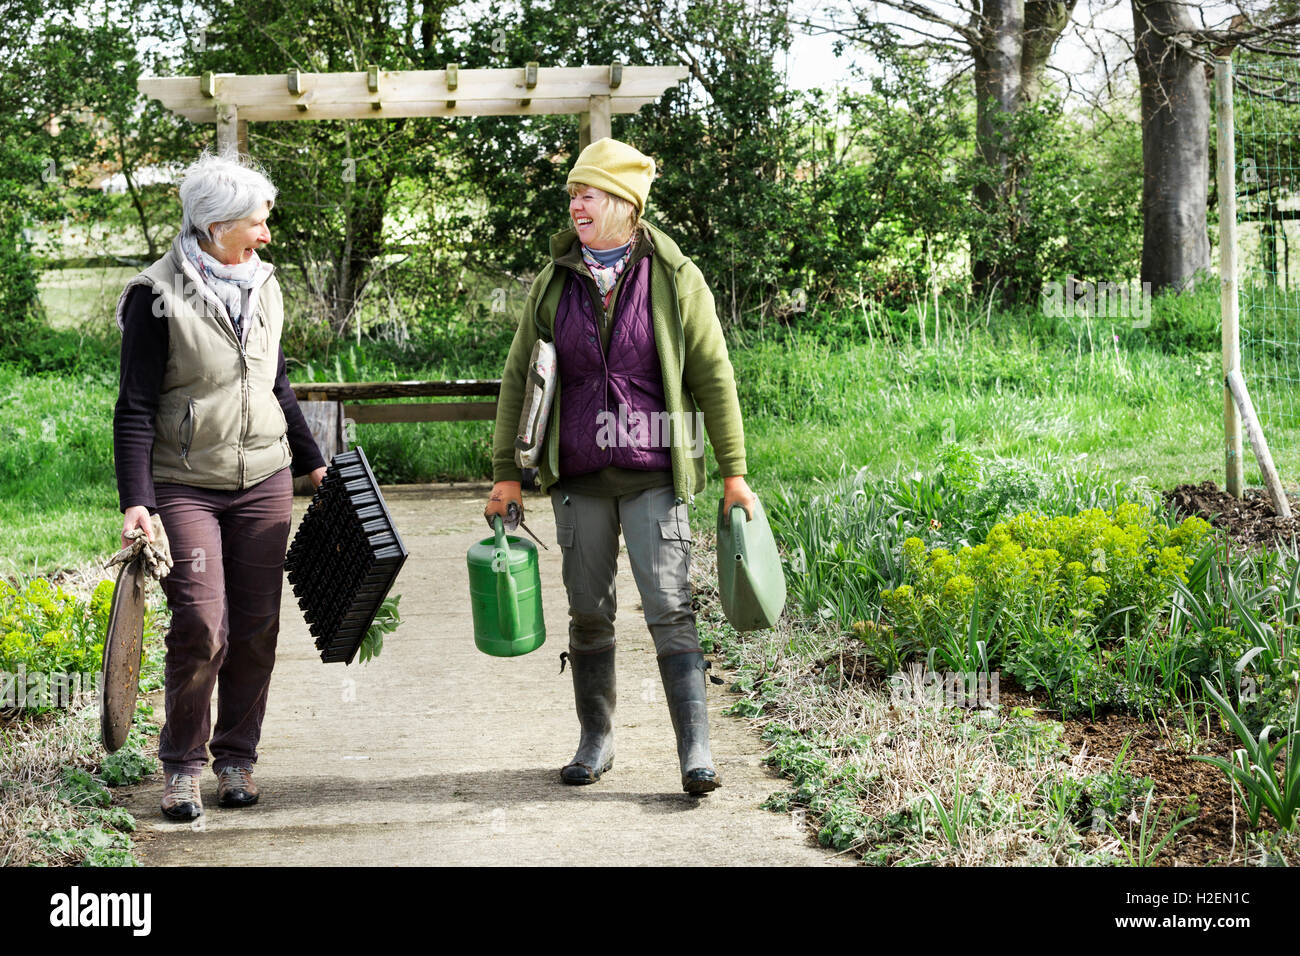 Two women walking along a path carrying kneeler pads and watering can and plant trays. Stock Photo